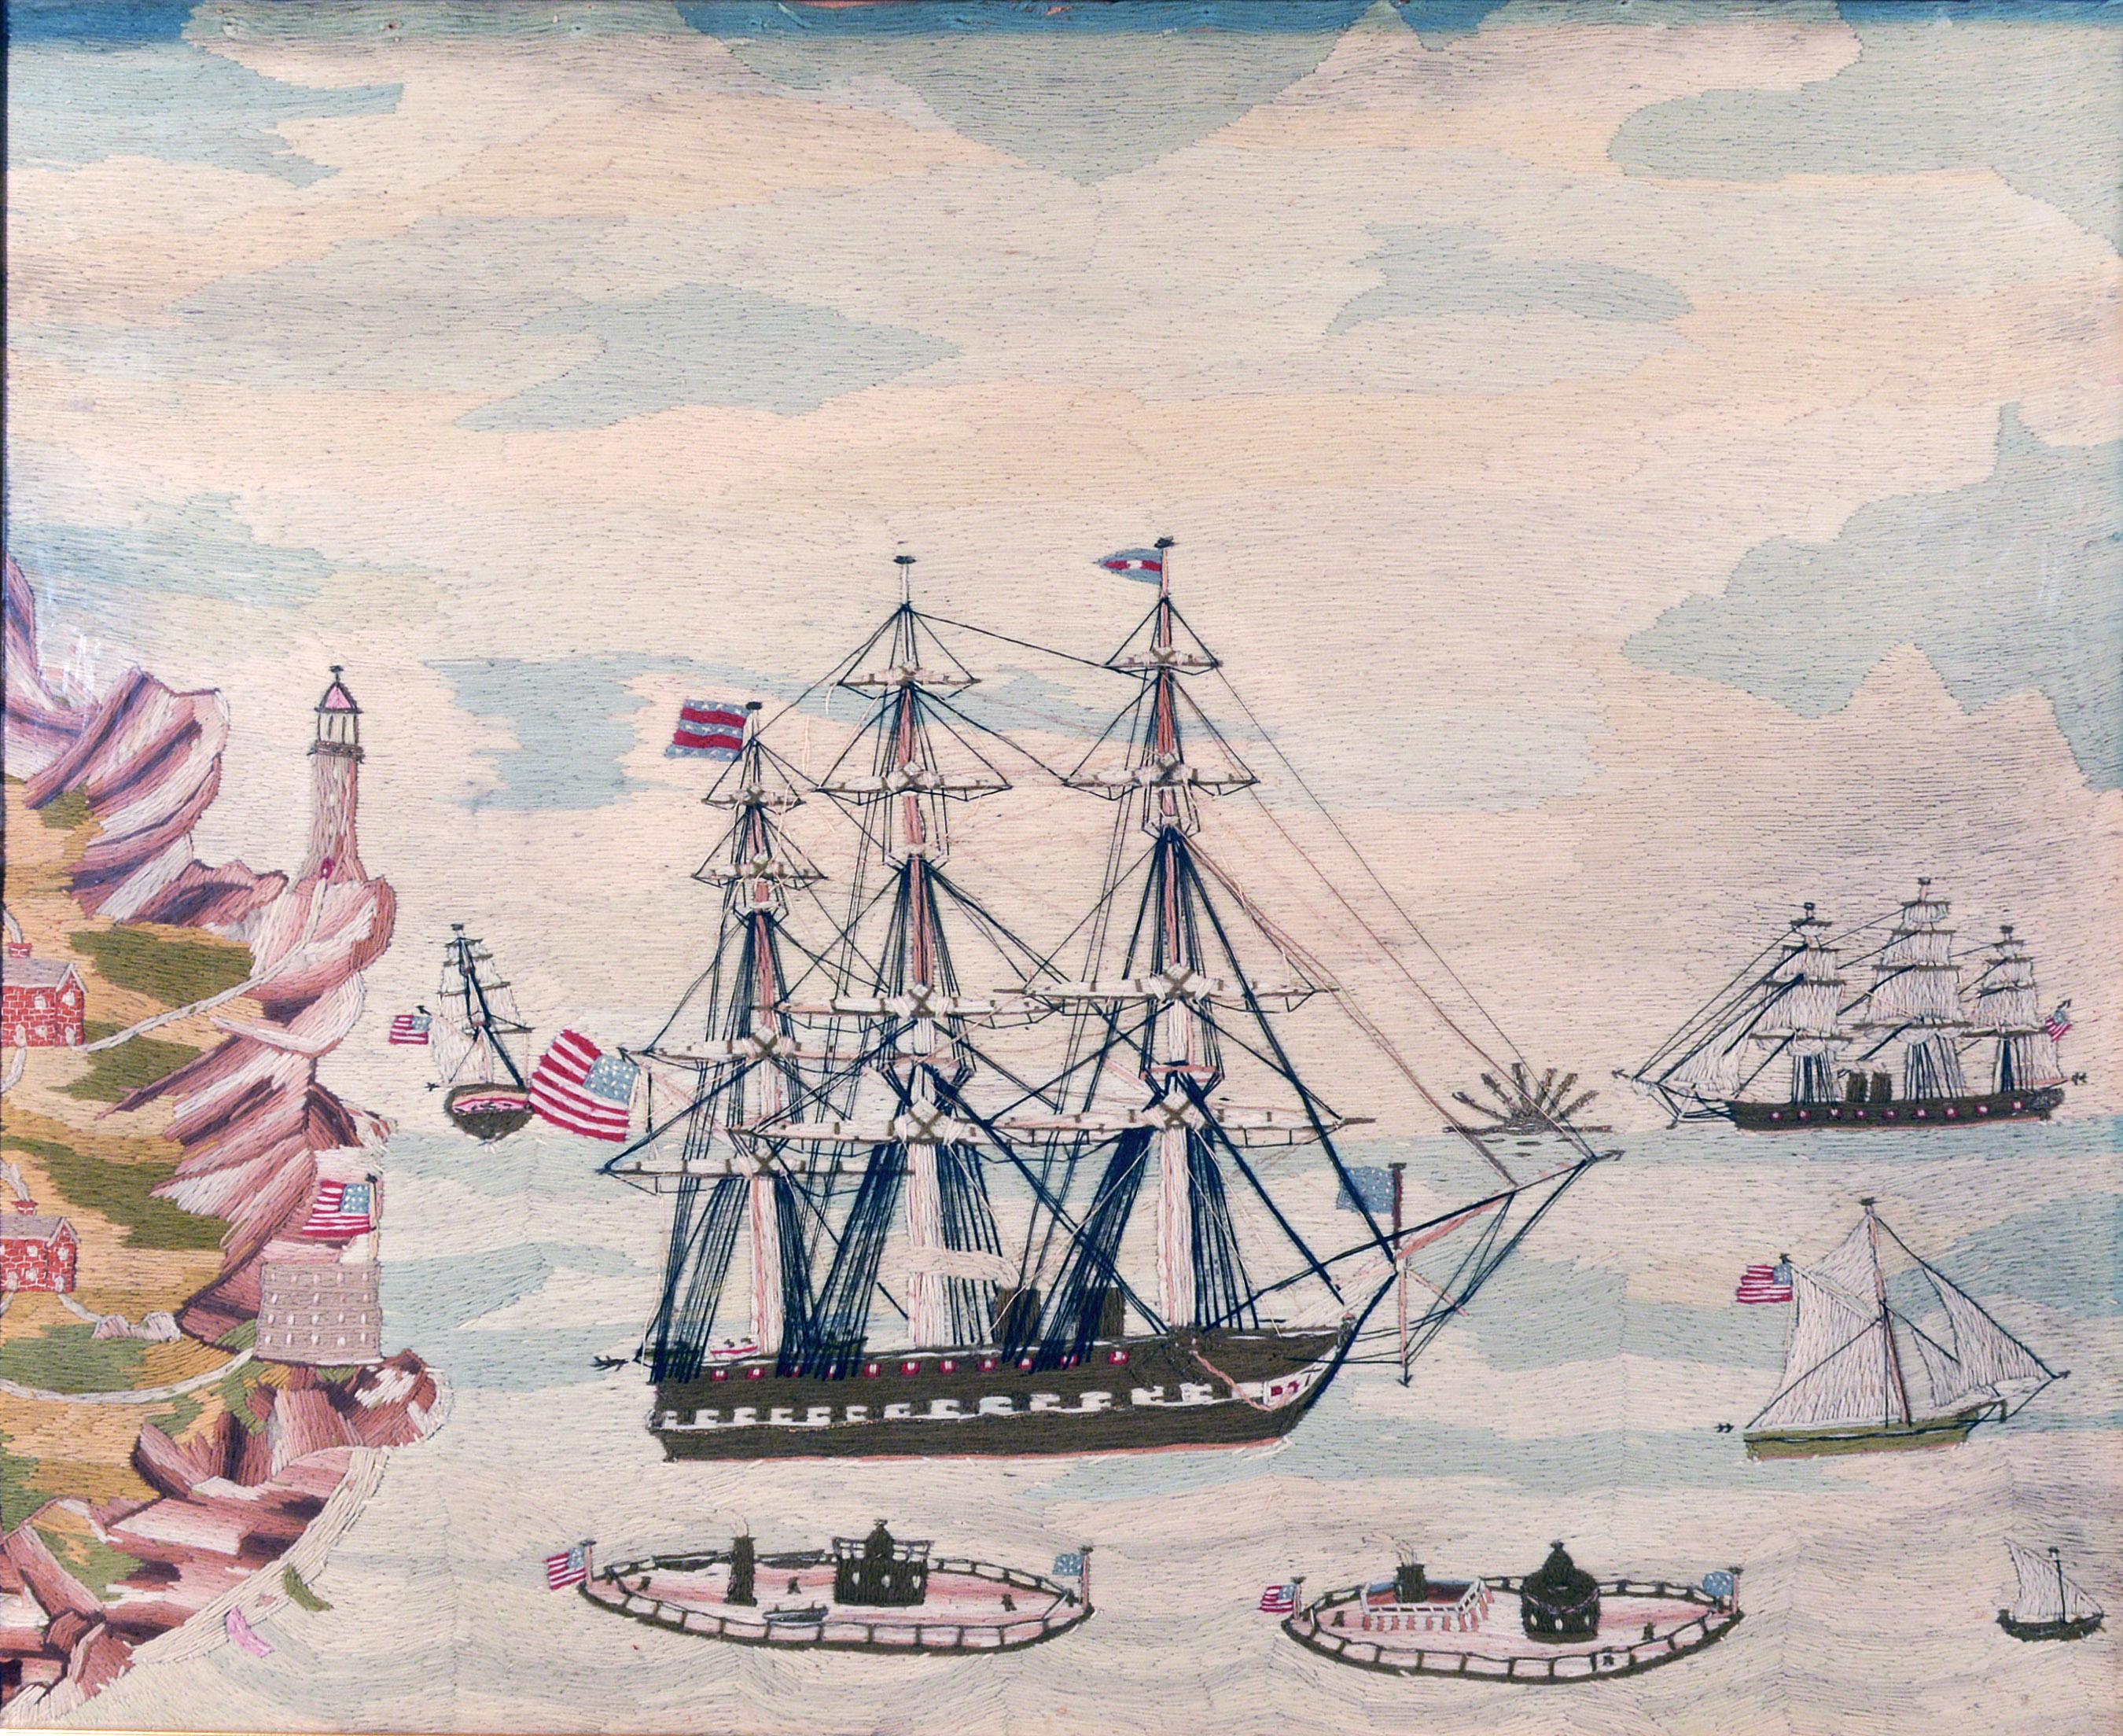 American Sailor's wool work depicting ten naval vessels,
1865-1870
  

A remarkable large American sailor's woolie depicting ten different American ships including two monitors probably in New England.

The scene depicted centers on an American ship